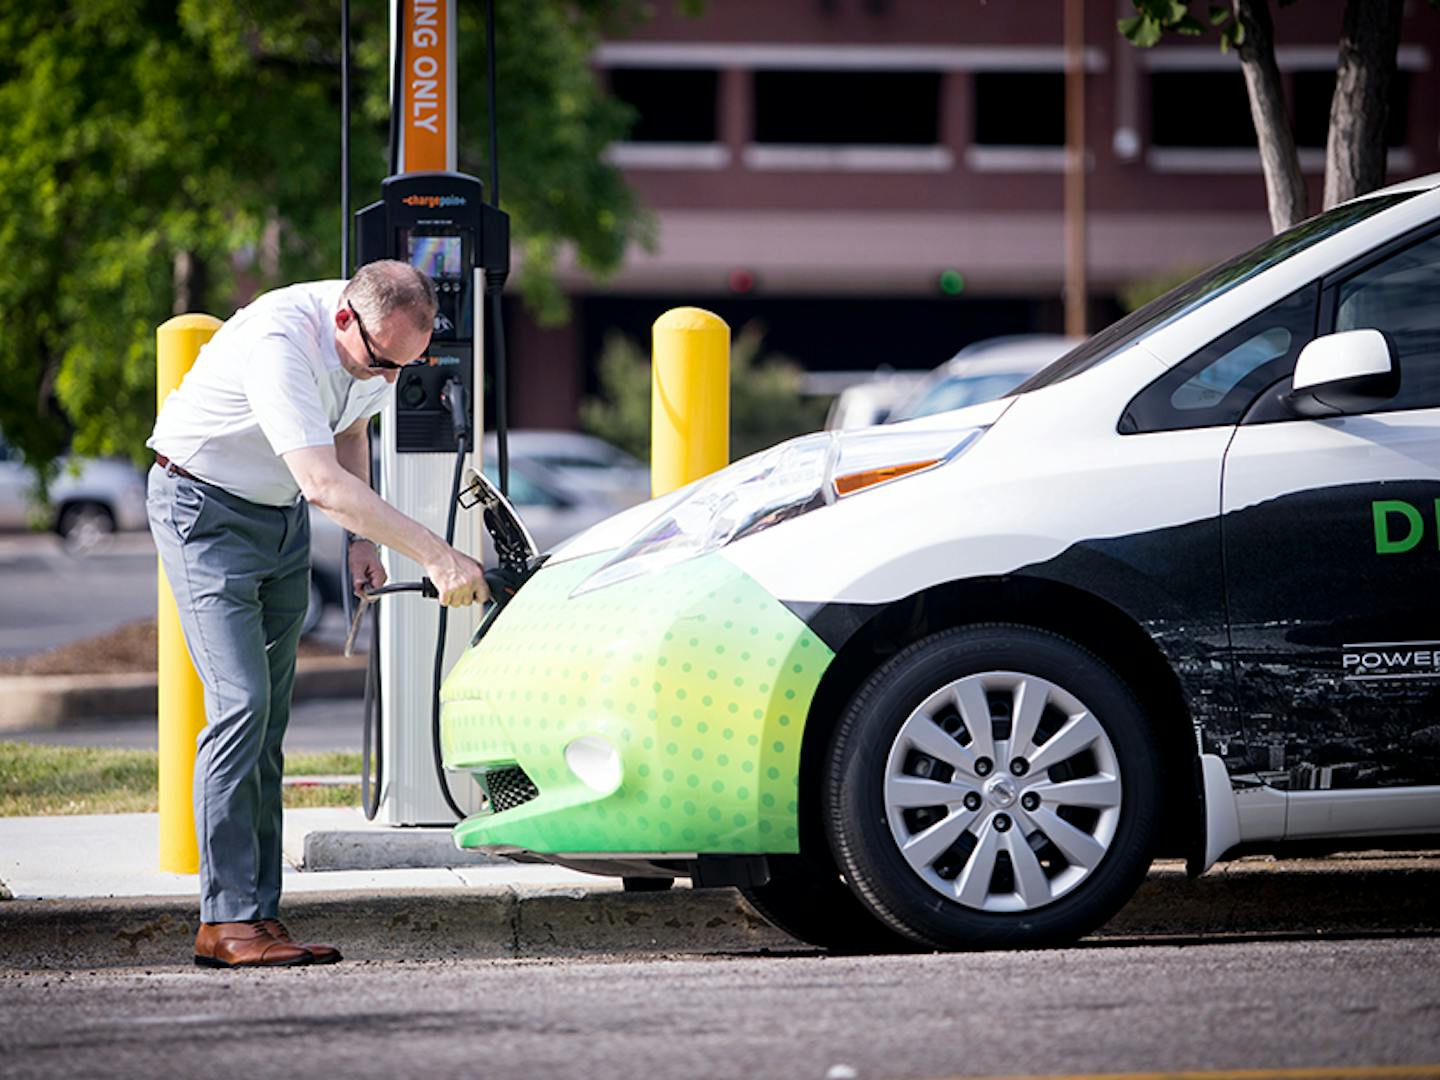 Charge your Chattanooga vehicle with solar power